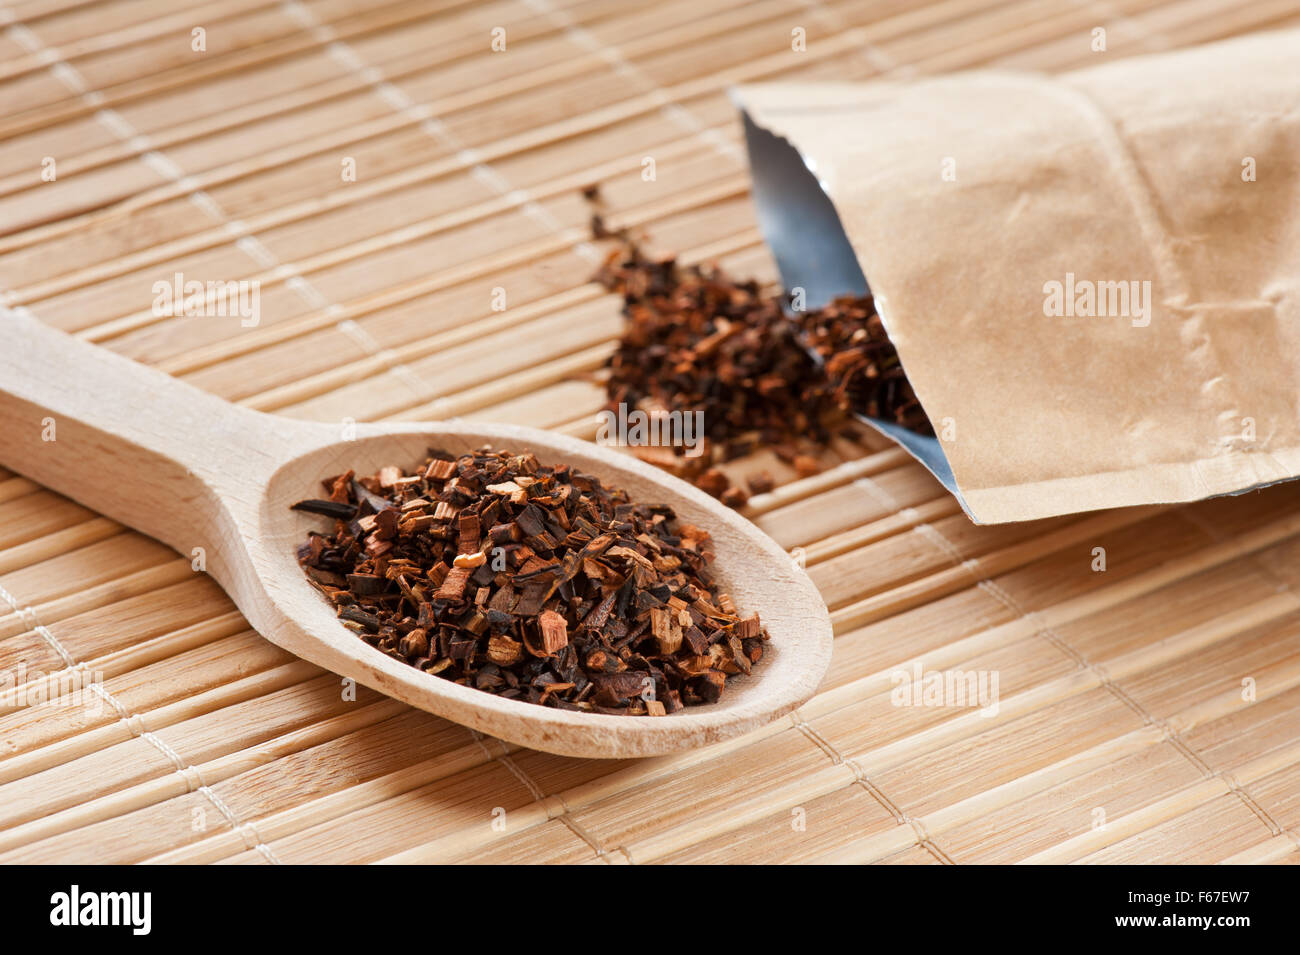 Honeybush dried tea portion, Heuningbos herbal tea similar to Rooibos, made from the shoots of shrub, stems and leaves chopped Stock Photo